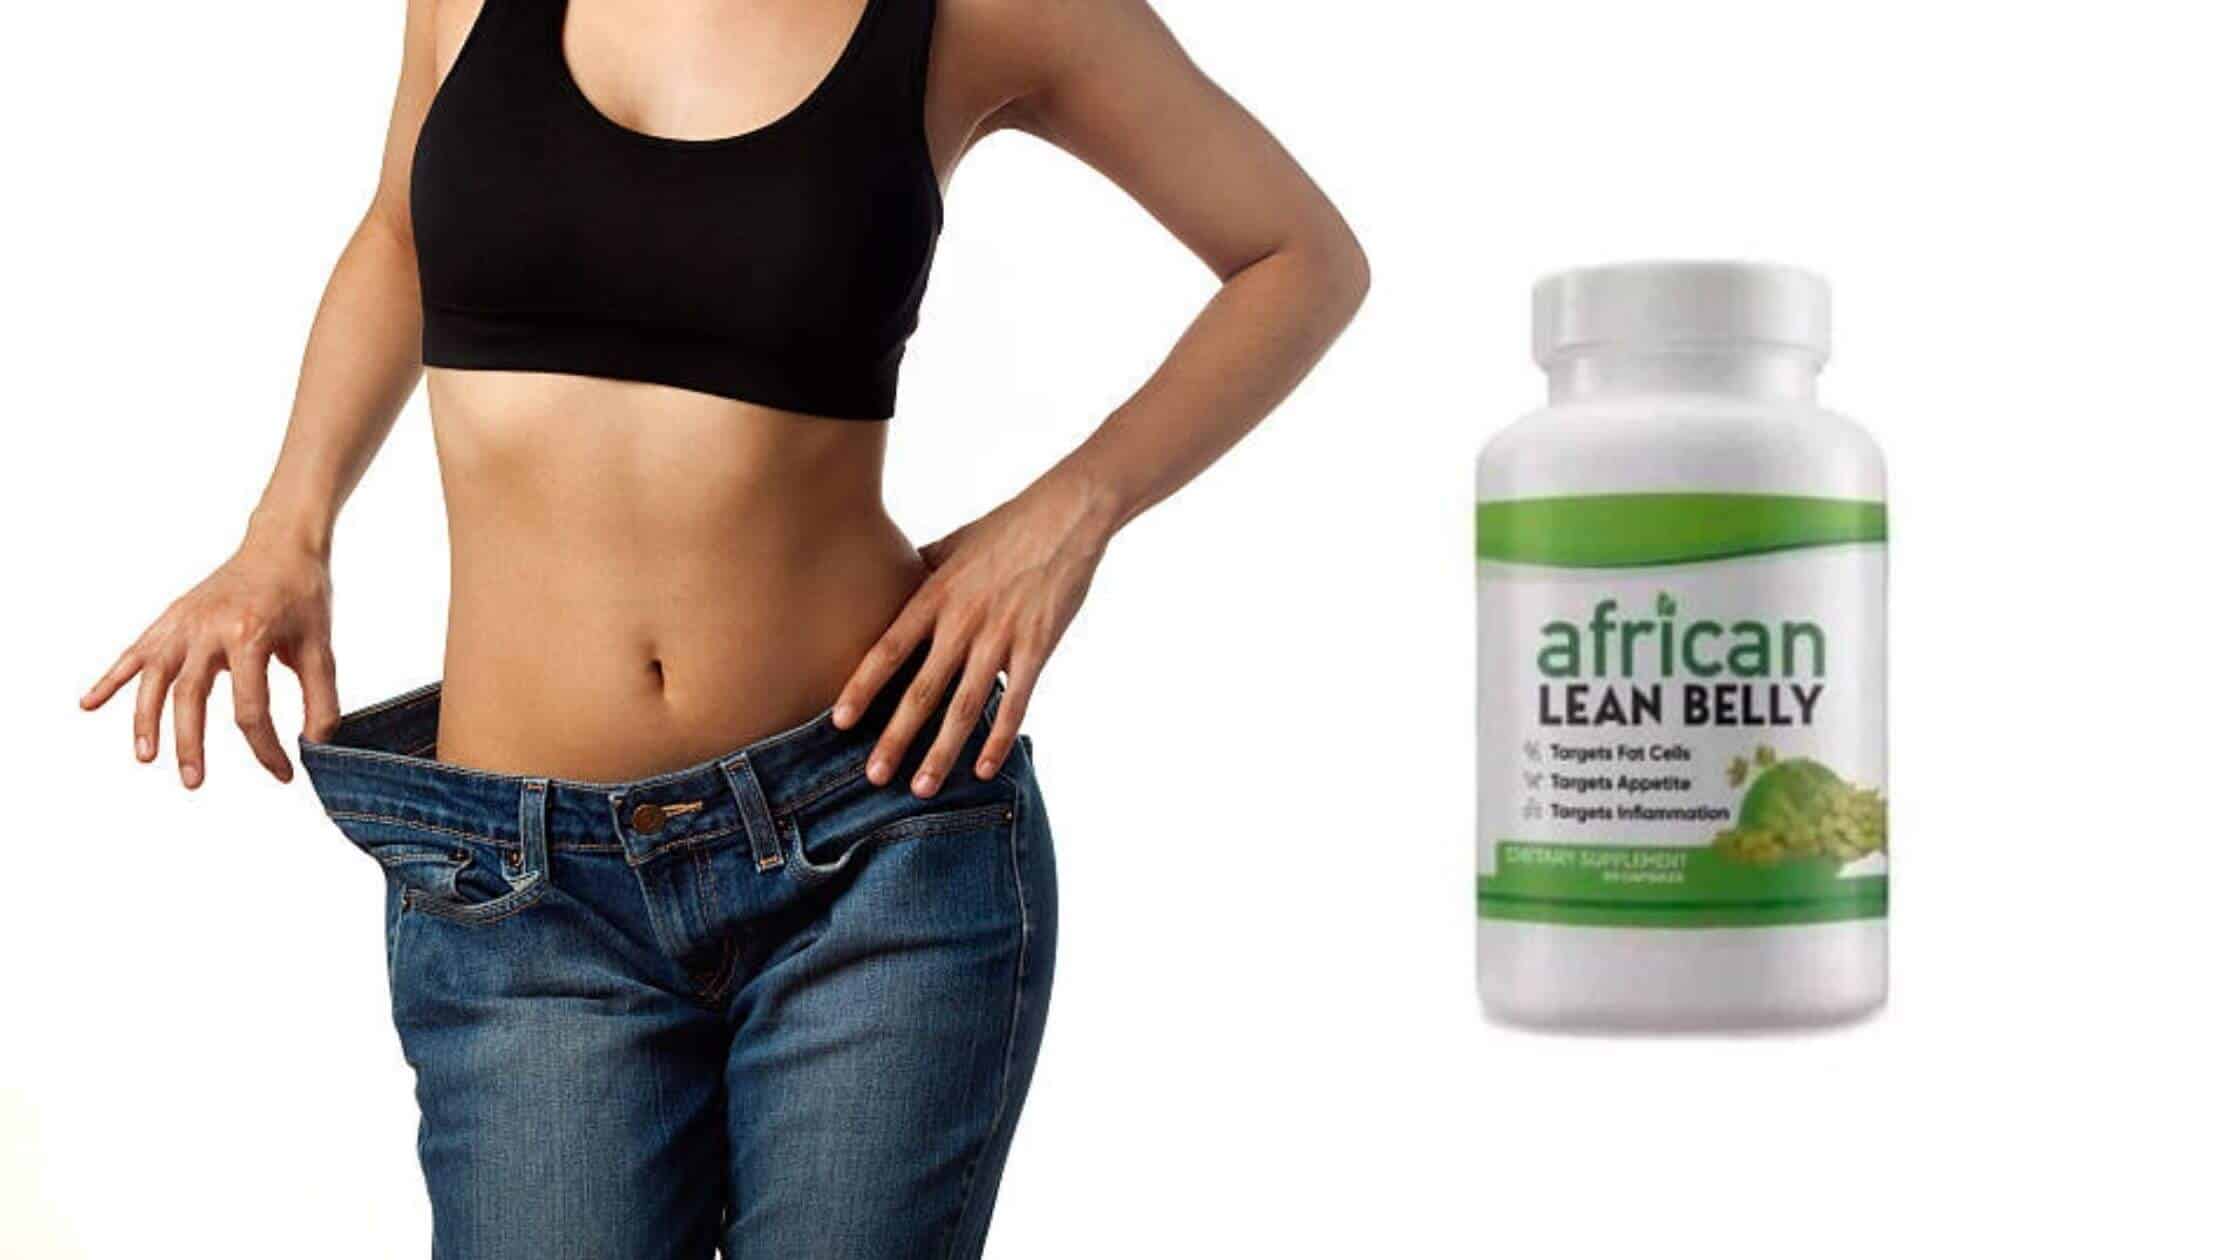 African Lean Belly Benefits